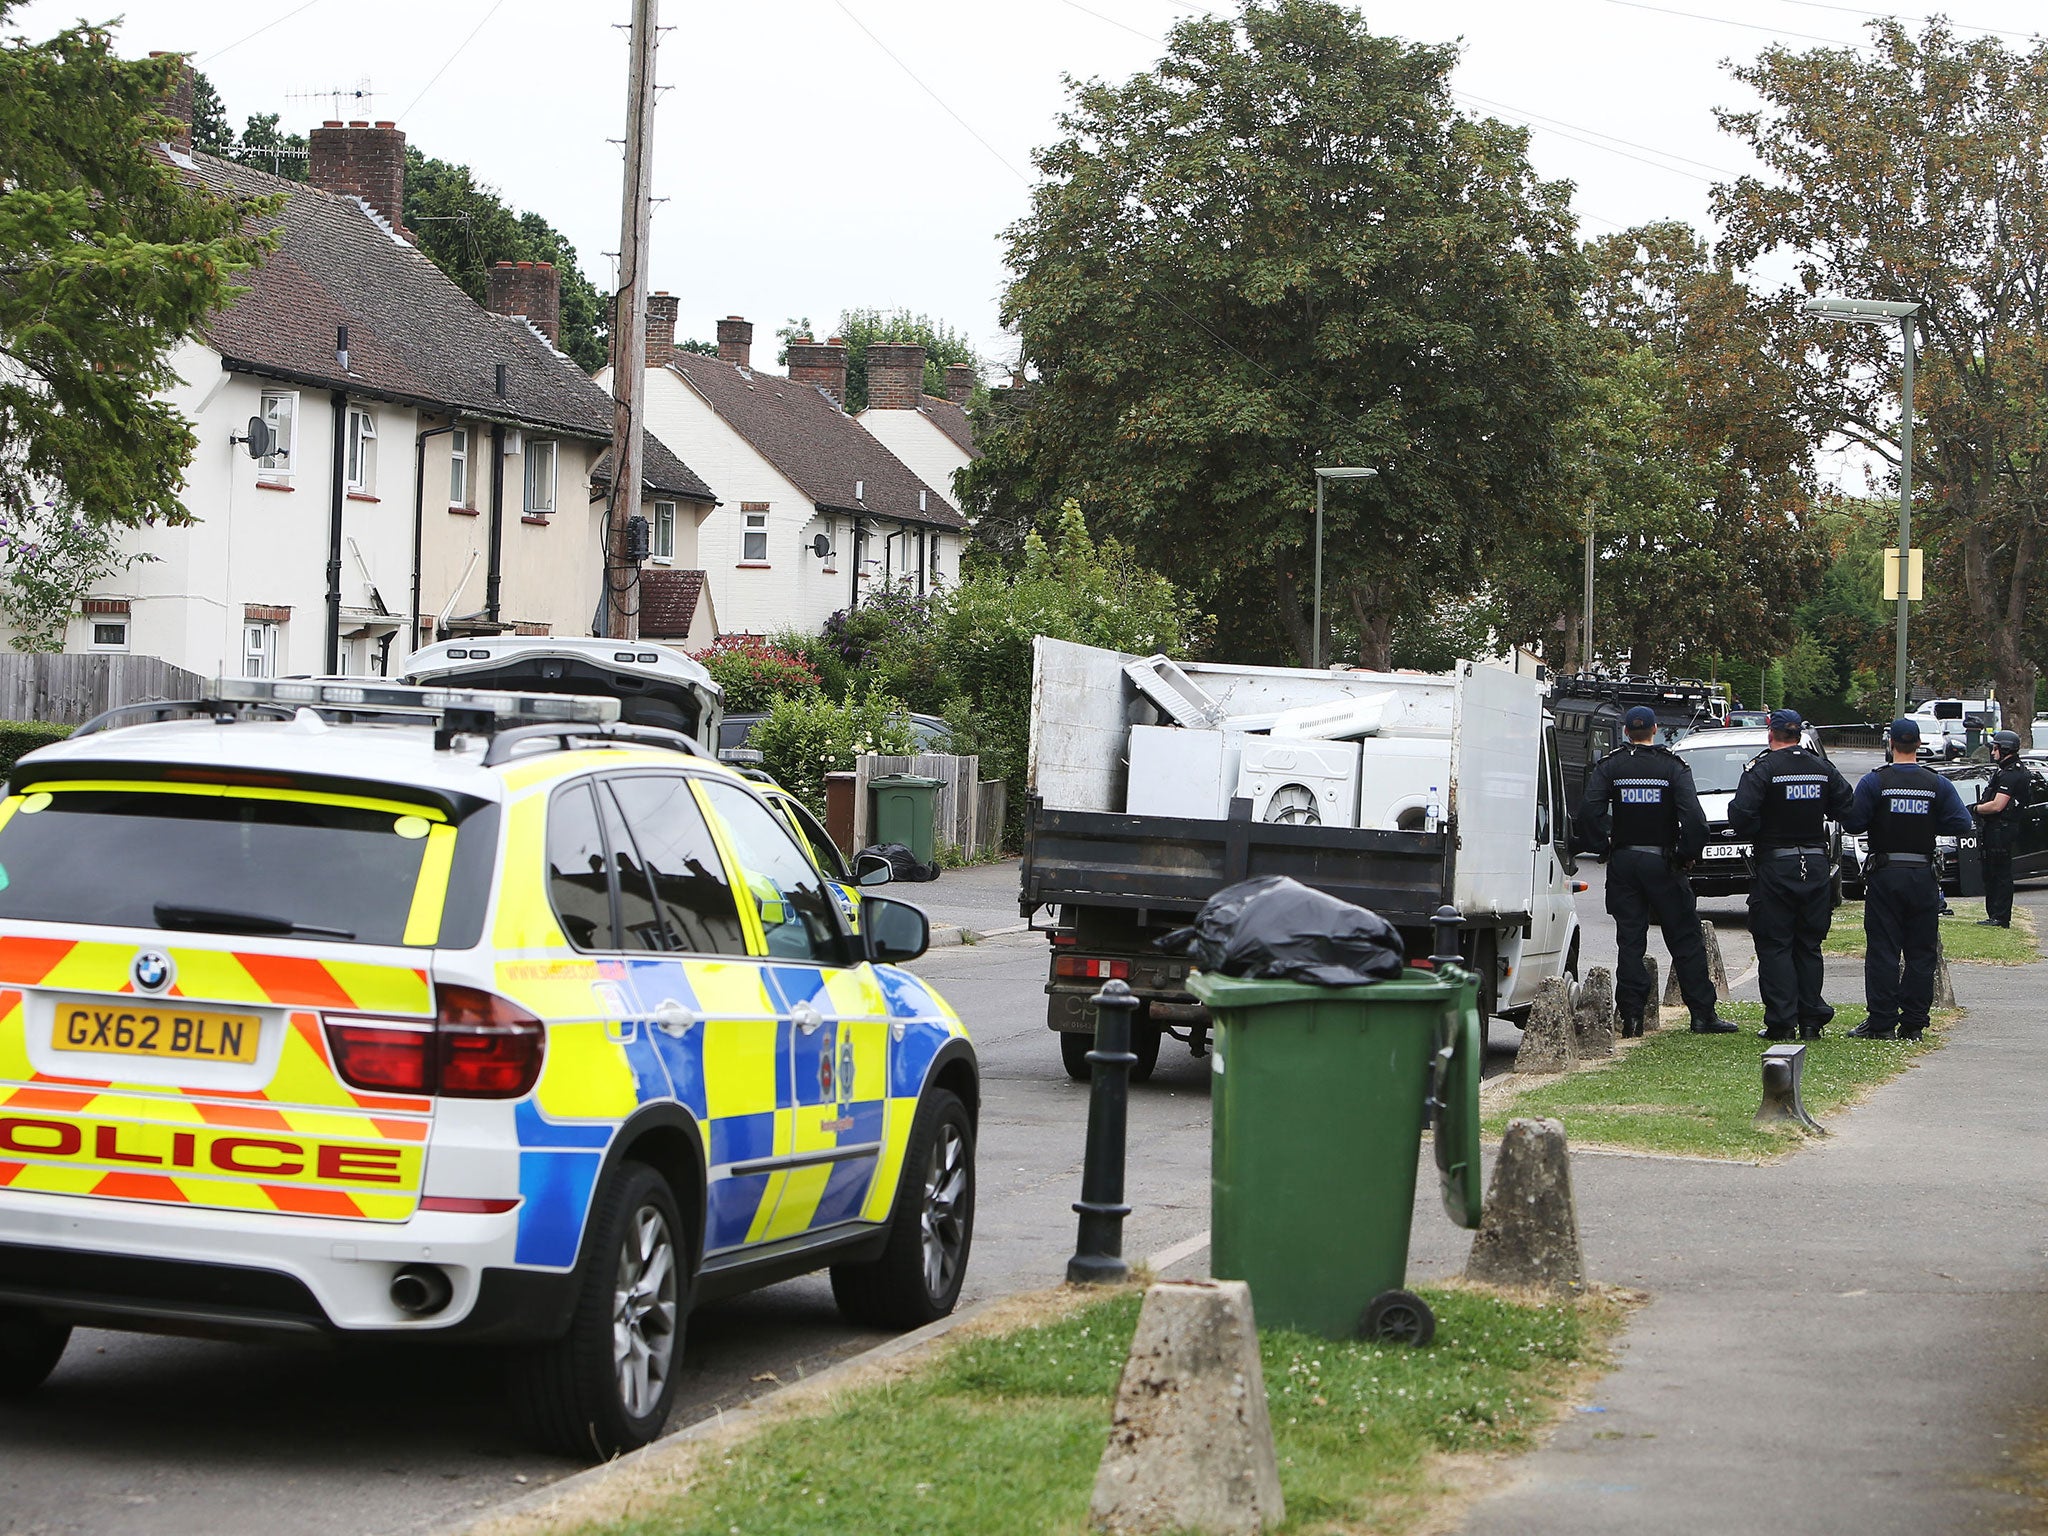 Armed police at the scene in Smallfield, Surrey, after reports someone was seen with a firearm during a dawn raid.